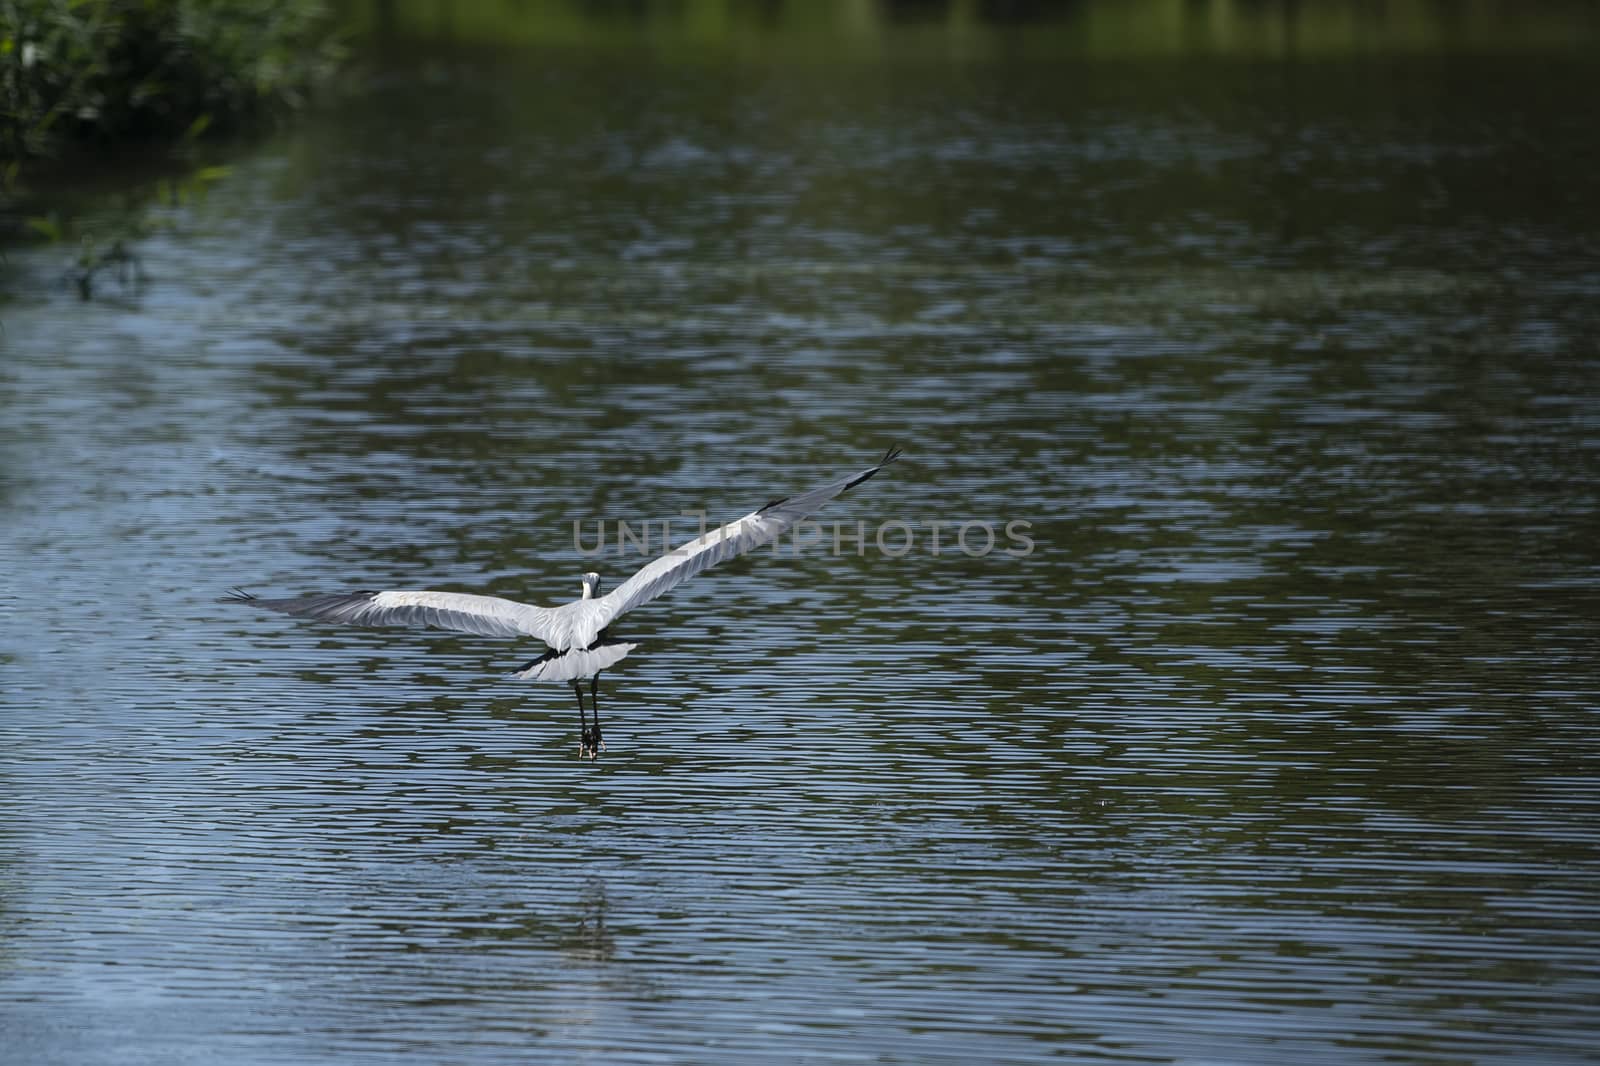 A grey heron flying of the pond looking for fish by ankorlight